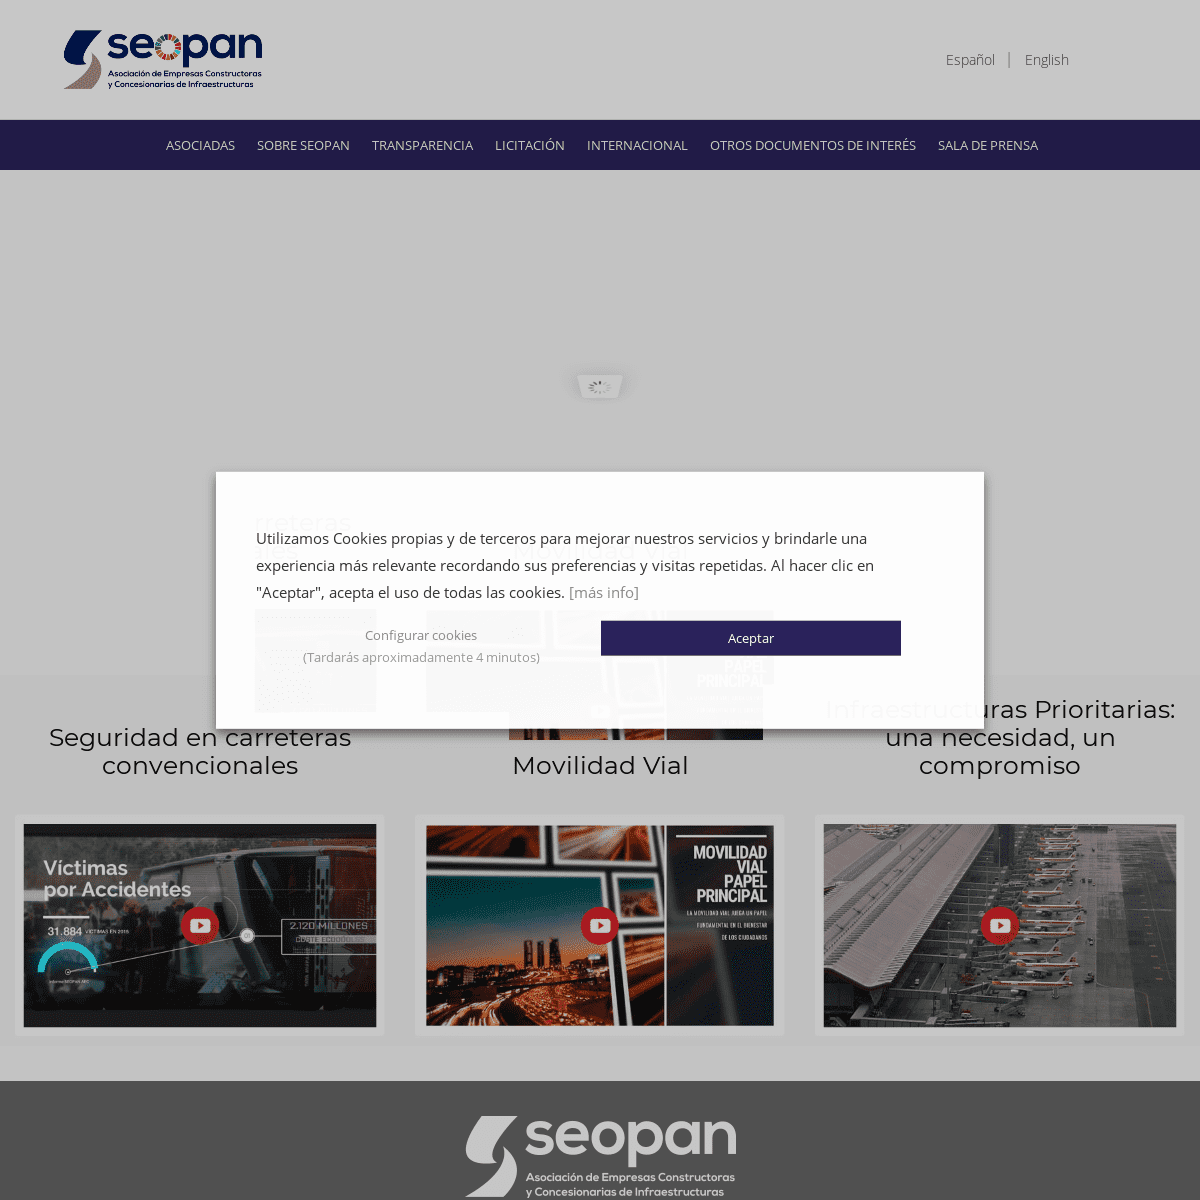 A complete backup of https://seopan.es